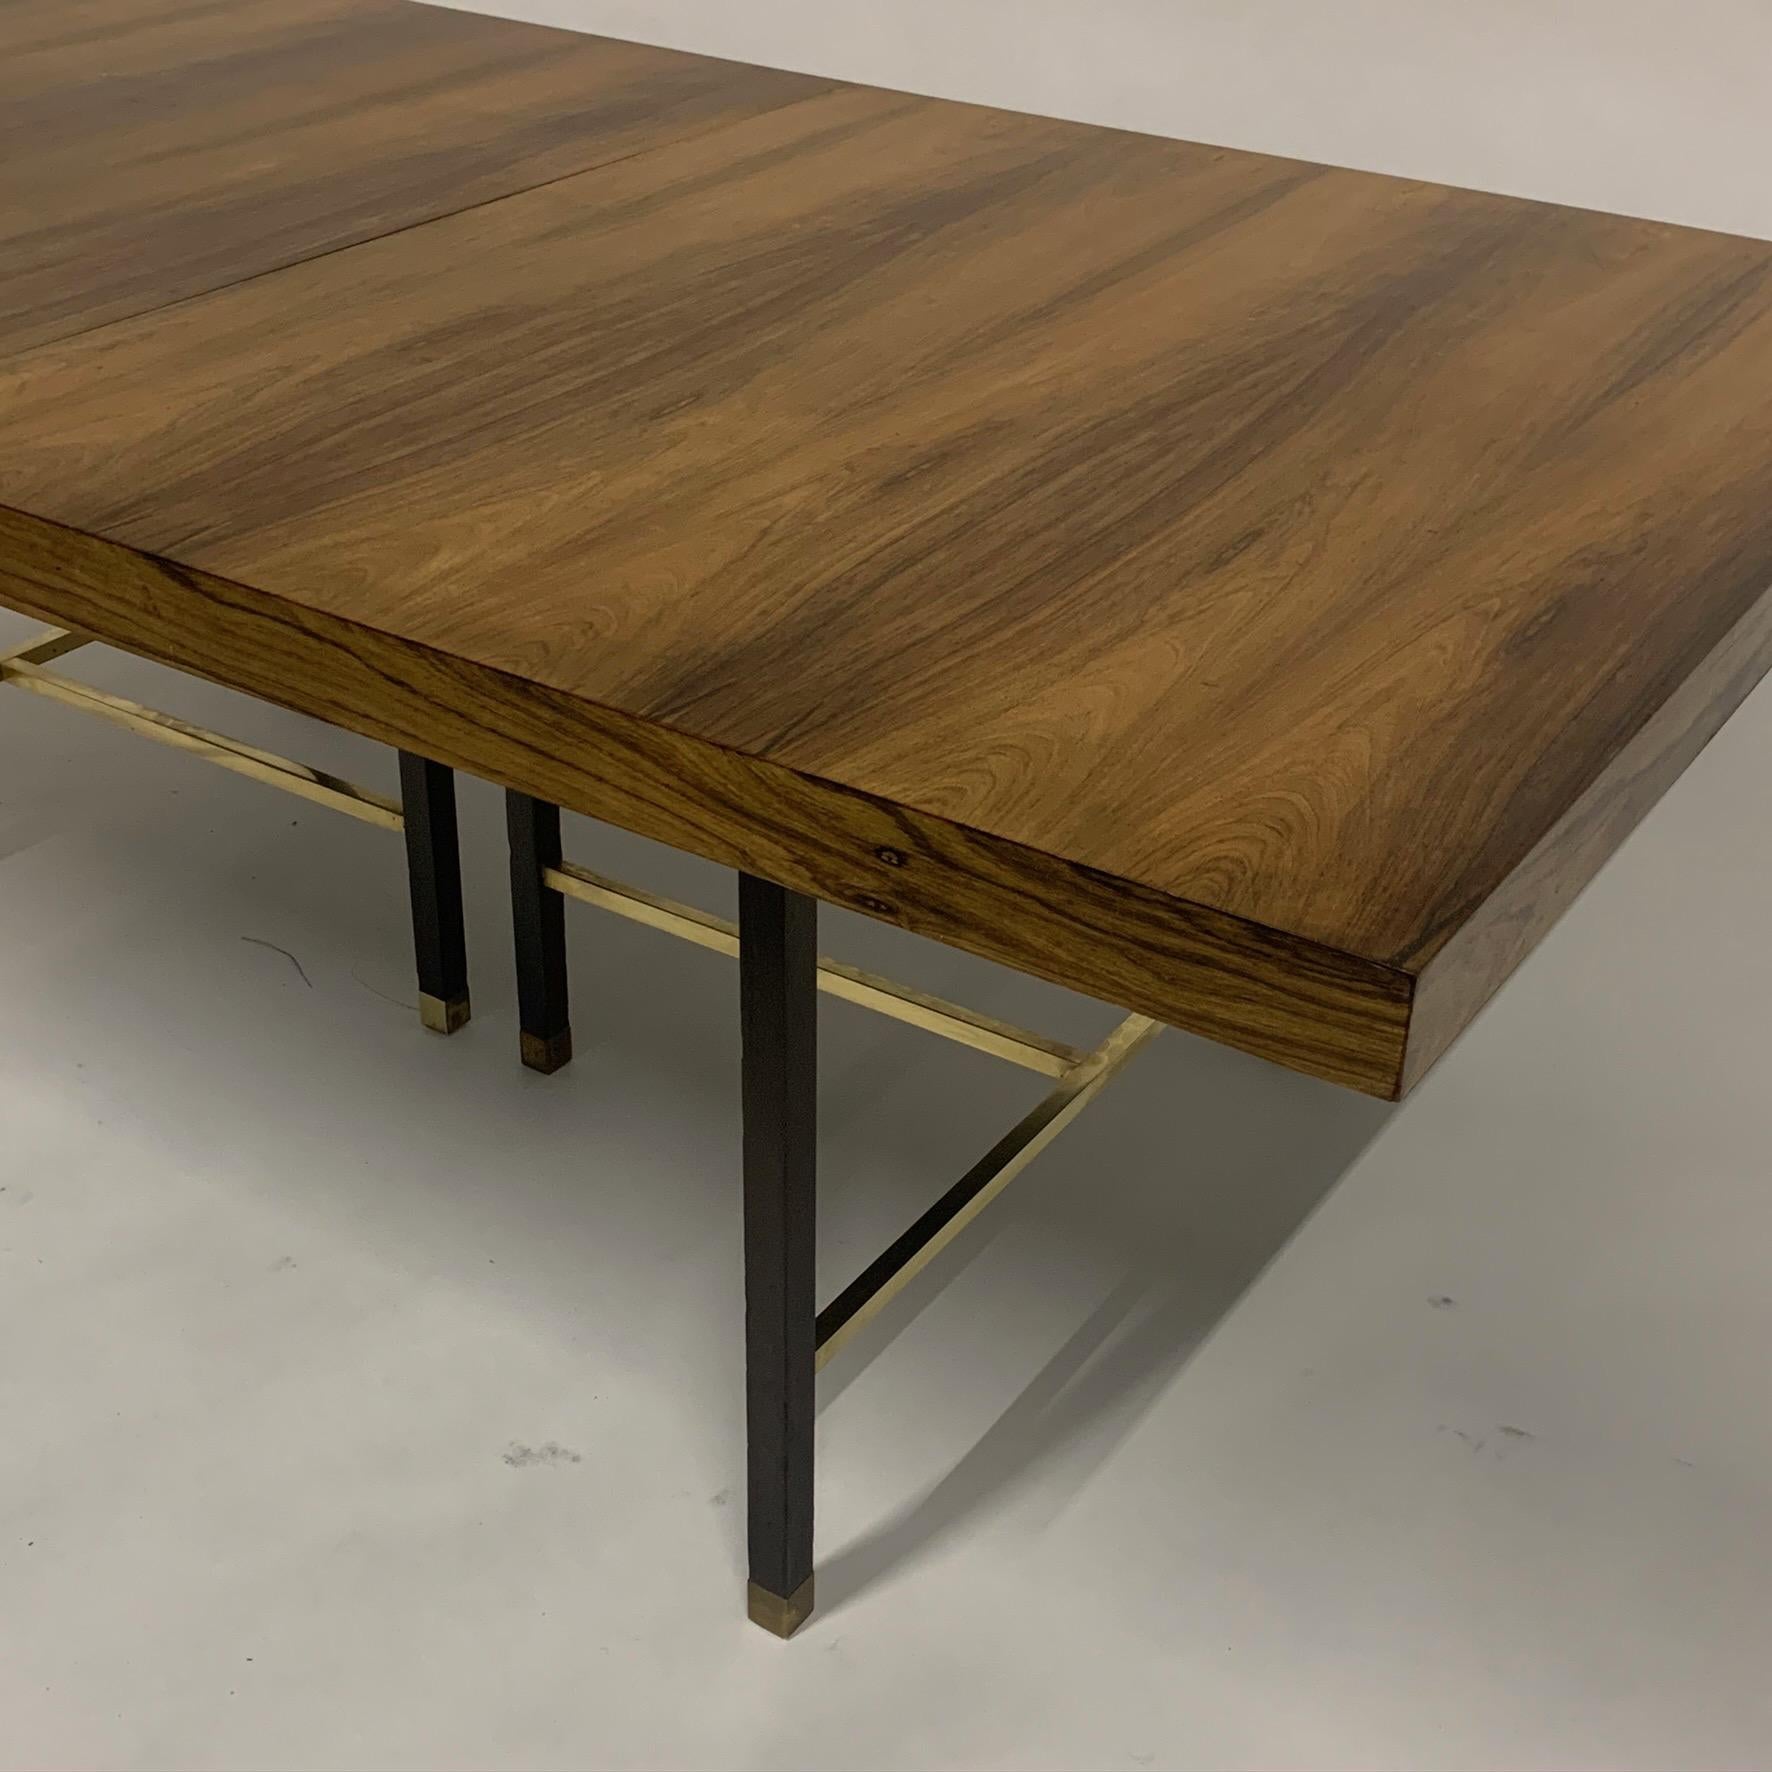 20th Century Harvey Probber Sculptural Floating Dining Table in Rosewood, Brass and Mahogany